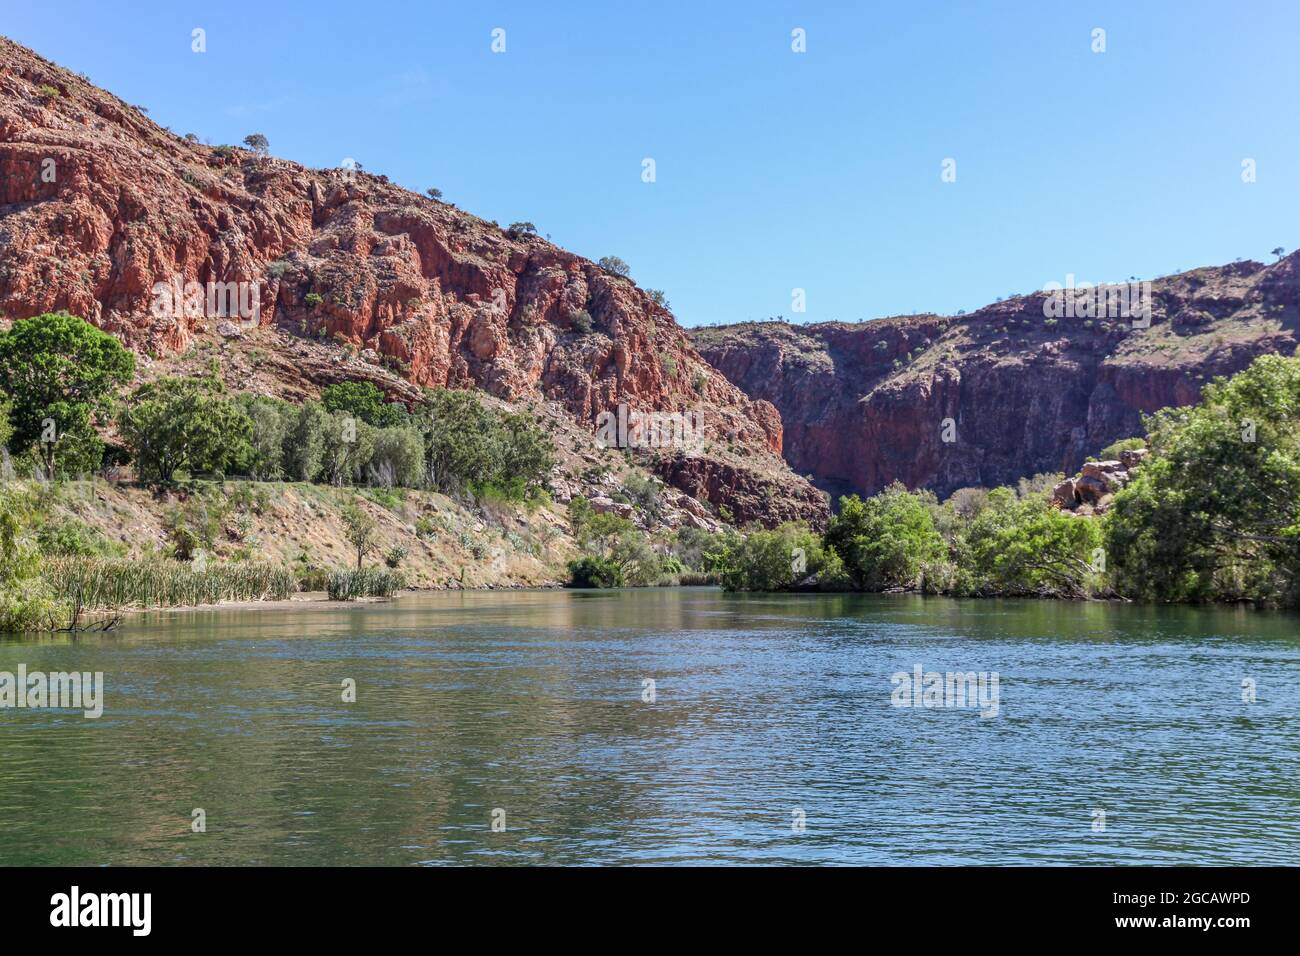 Ord river is an important waterway in the Kimberley region which flows from Lake Argyle through gorge area then onto irrigated farmland. Stock Photo